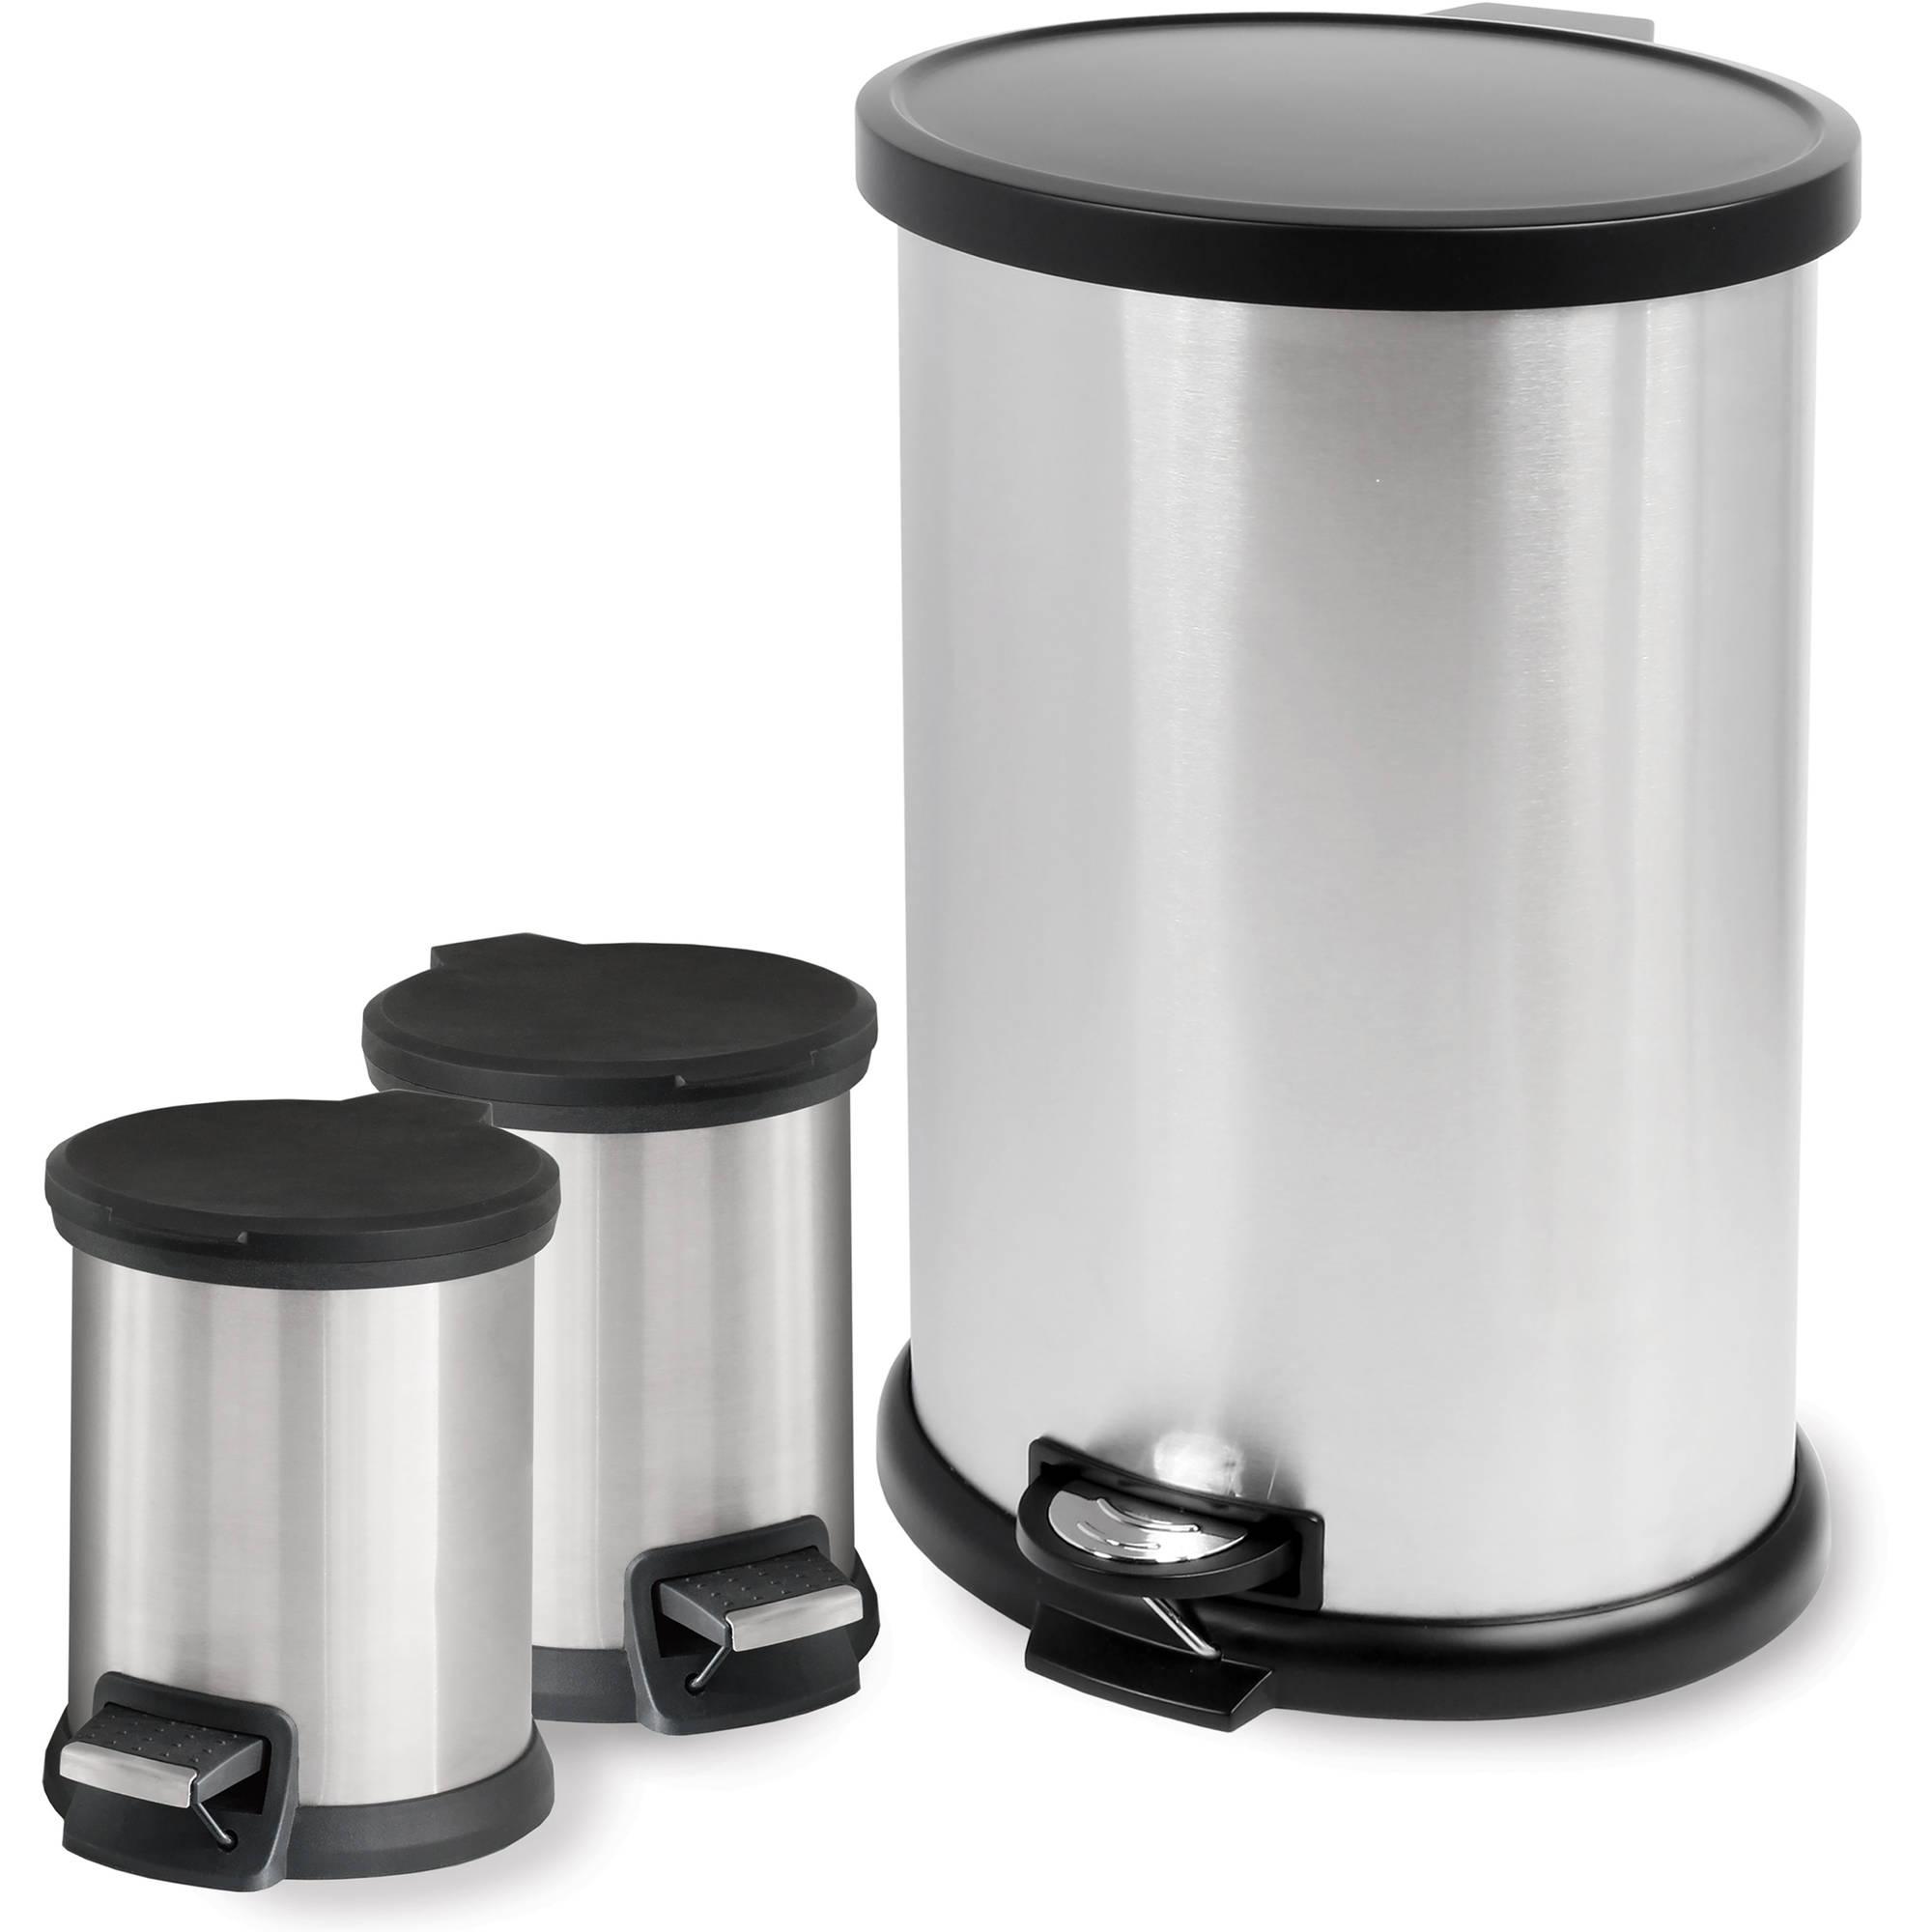 Mainstays 3-Piece Stainless Steel 1.3 and 8 gal Kitchen Garbage Can Combo - image 1 of 7